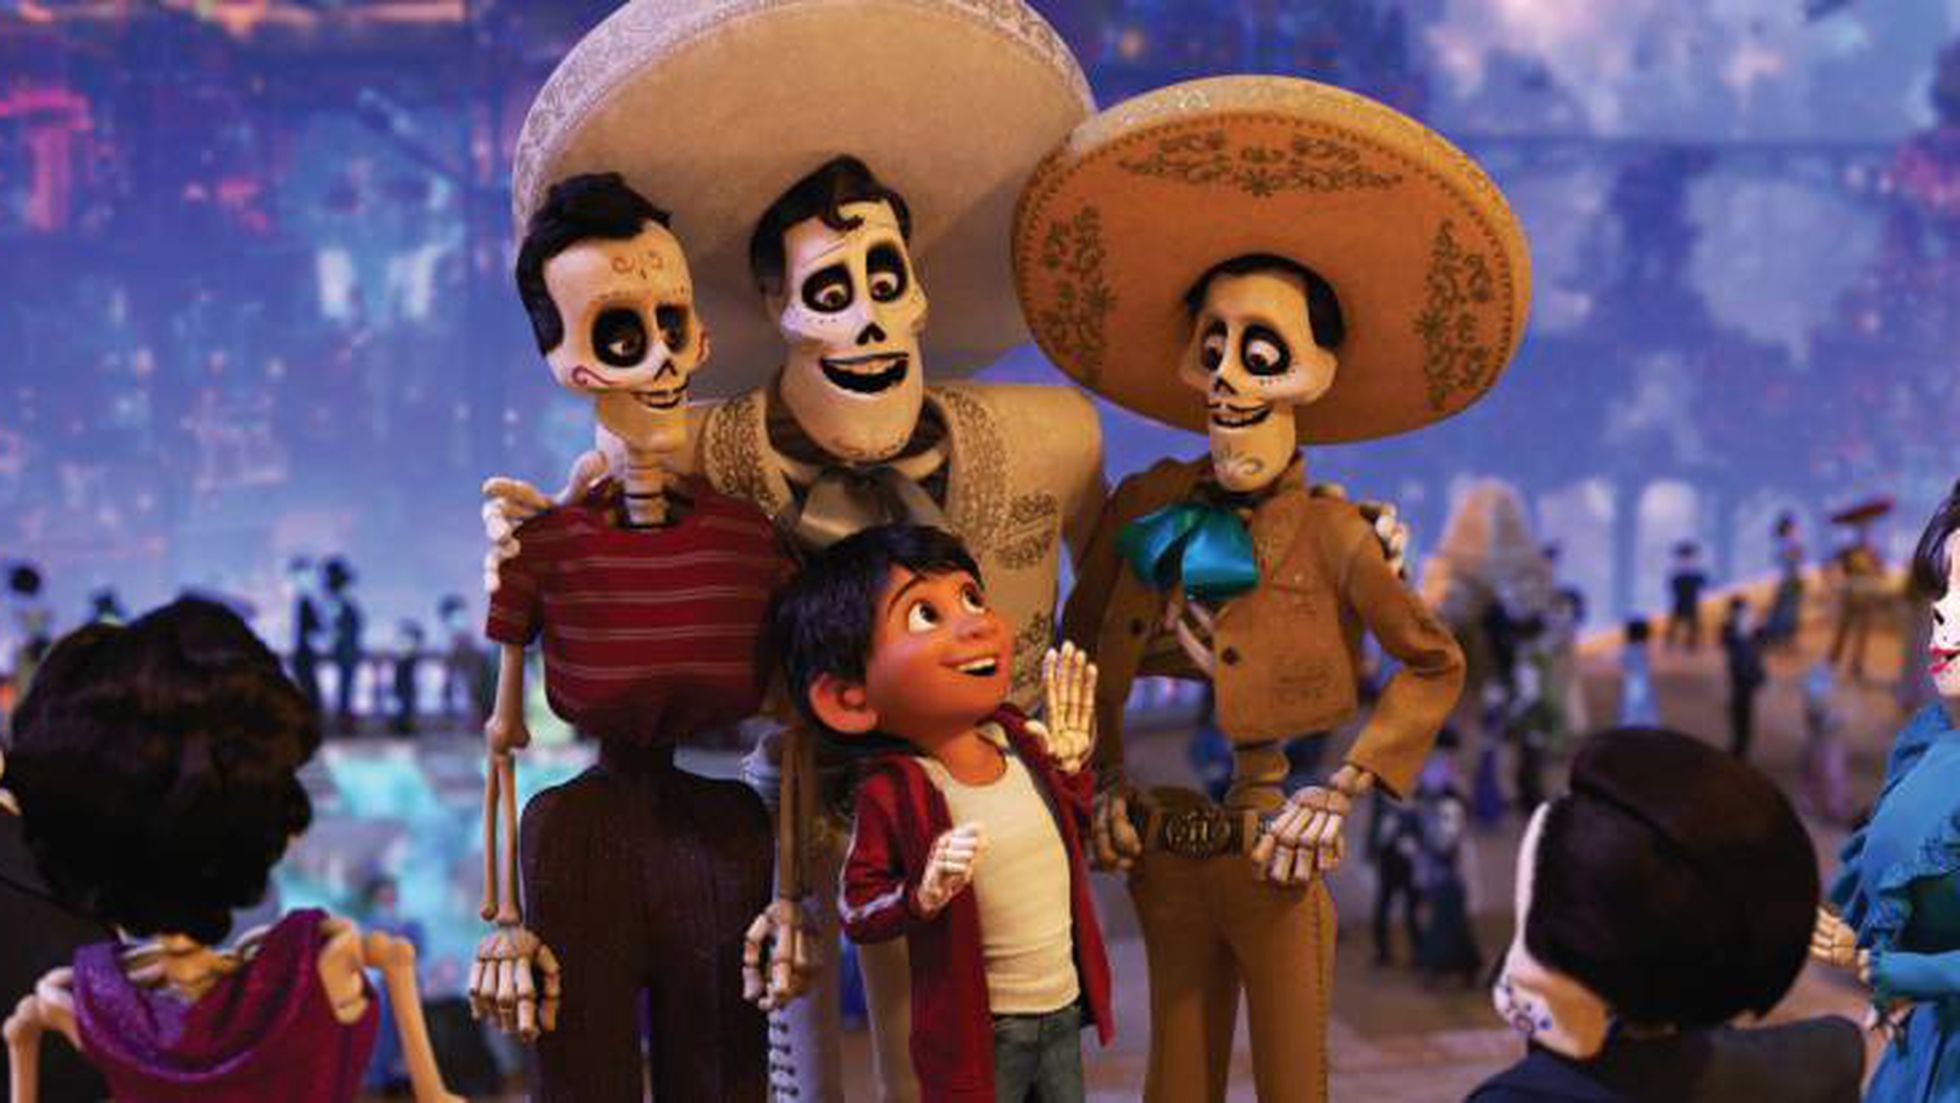 Animation: Mexico wowed by Pixar's Day of the Dead tribute 'Coco' | Culture  | EL PAÍS English Edition